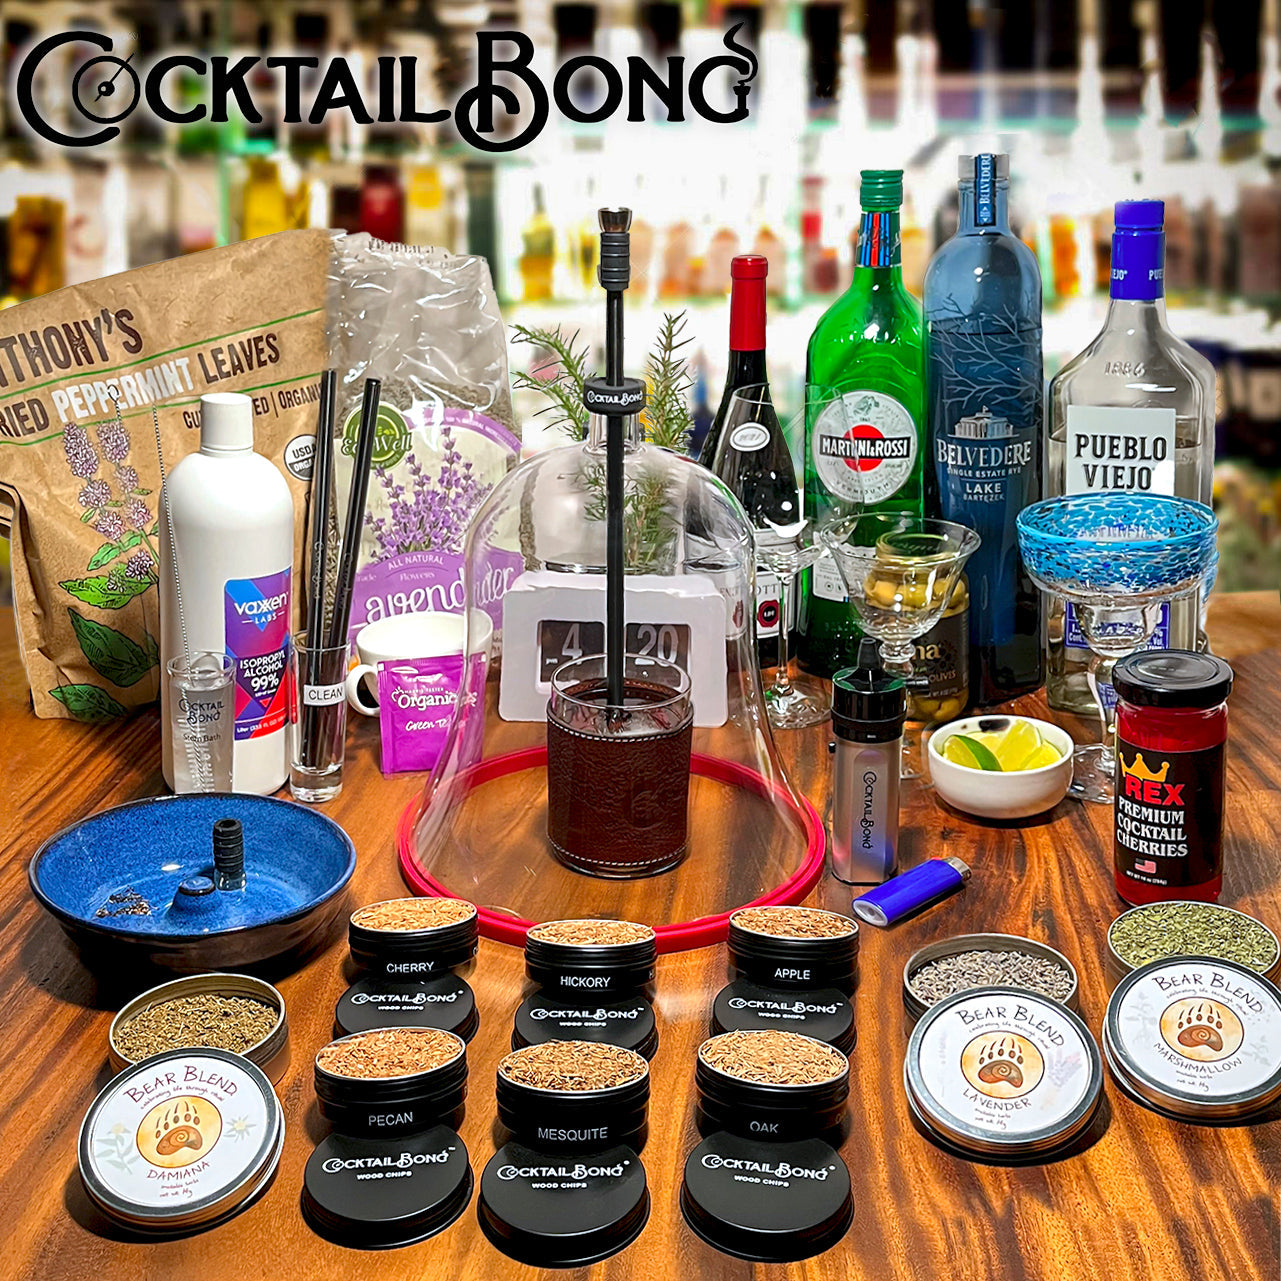 Cocktail Bong Cocktail Smoker Cold Smoking Kit with All Wood Flavors!